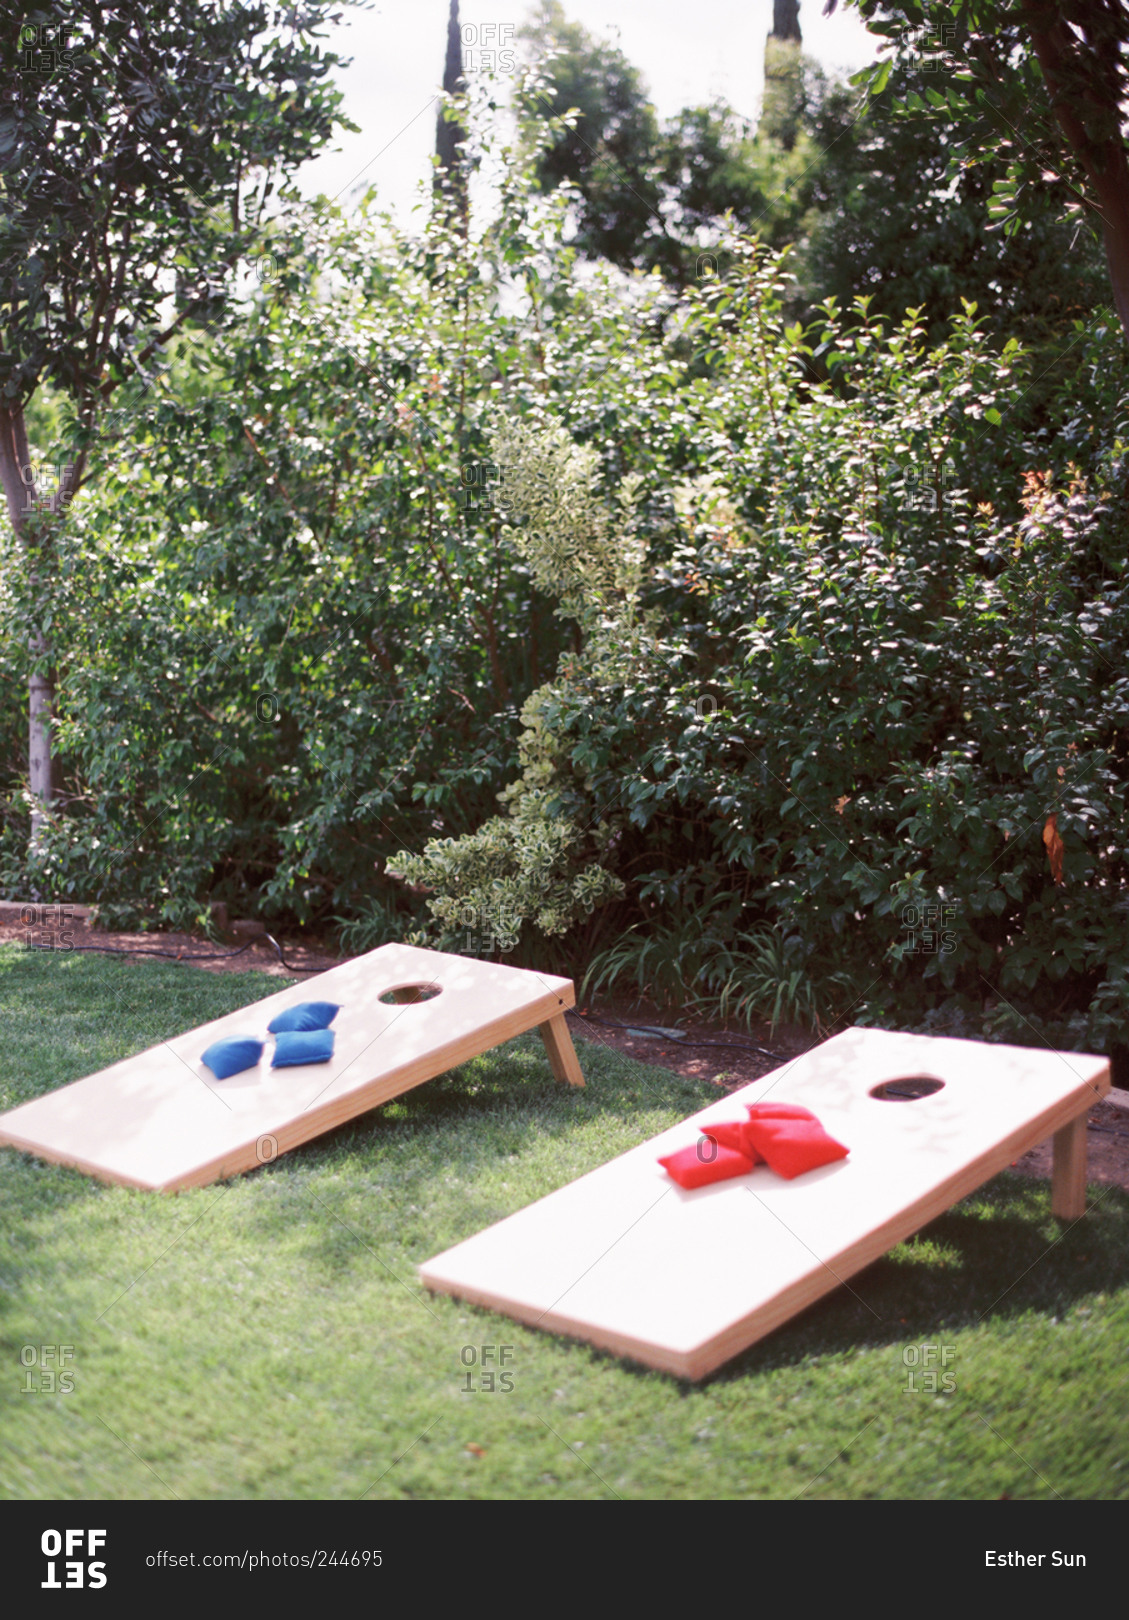 A lawn game in a back yard